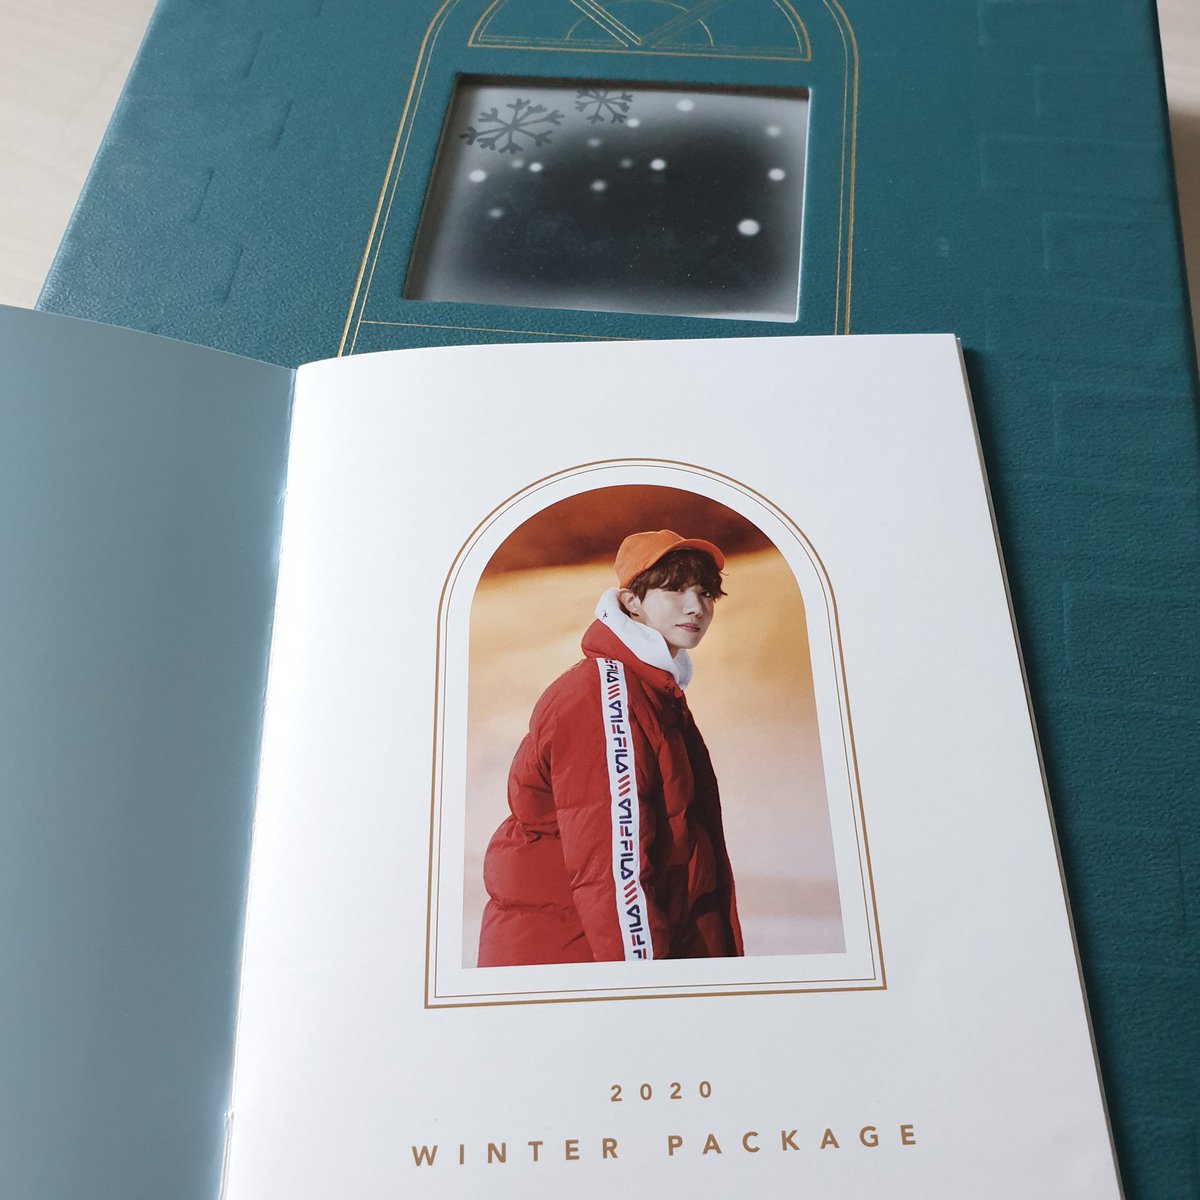 BTS WINTER PACKAGE 2020 IN HELSINKI

- PHP 3,500
- UNSEALED (complete inclusions)
- with Hobi mini photobook
- SECURED
- pay as you order
- ETA: August to September

comment “MINE” or DM me if you’re interested.

WTS LFB PH PRE ORDER RARE MERCH WP20 DVD FULL SET JUNG HOSEOK JHOPE https://t.co/A8AkHiVymX